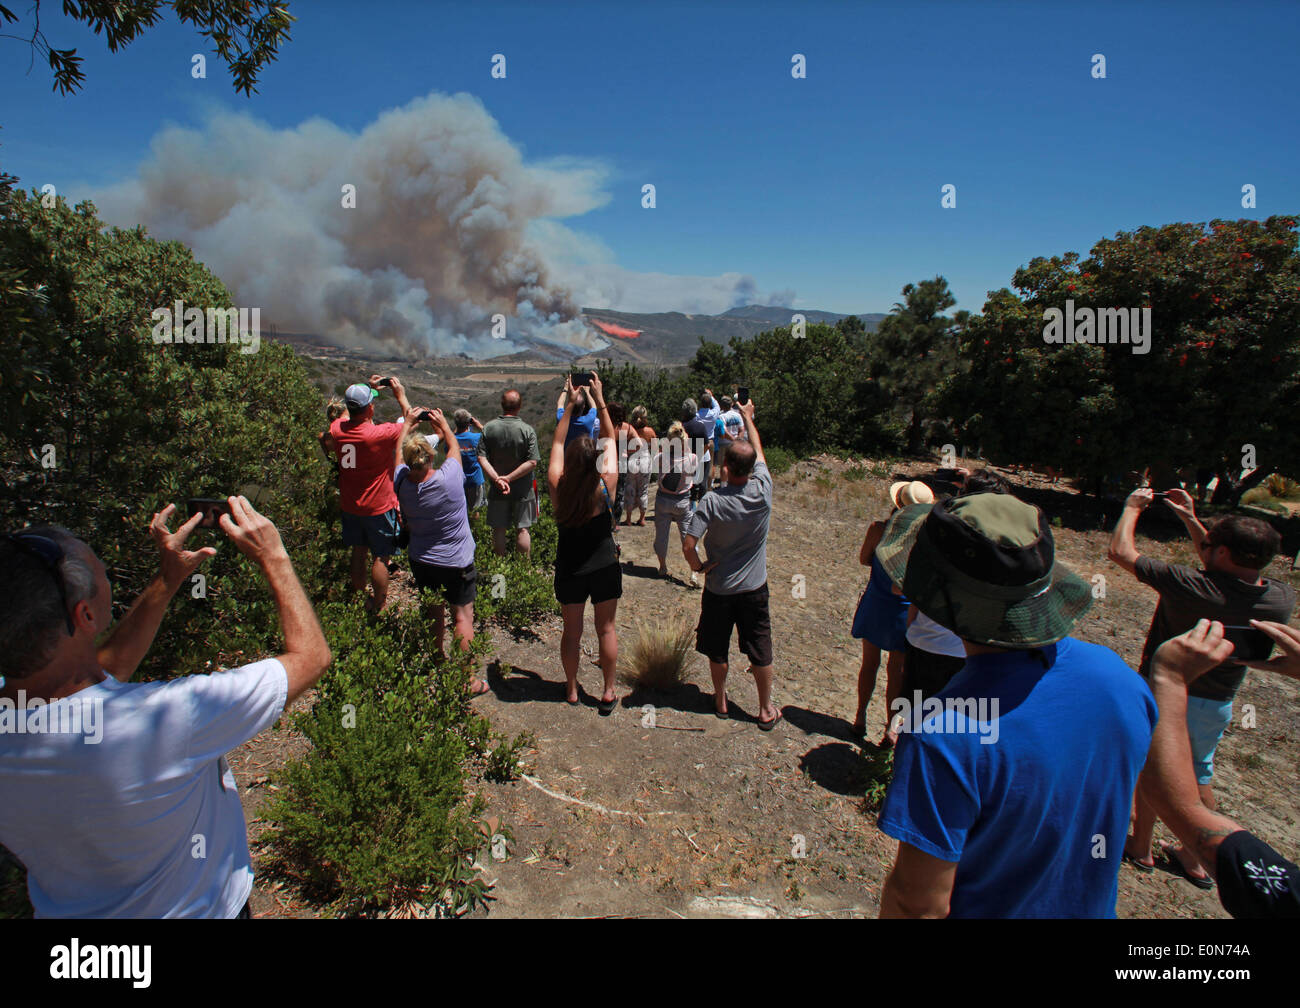 San Clemente, California, USA. 16th May, 2014. San Clemente residents watch and take pictures with cellphones of fire fighting aircraft as the Las Pulgas wildfire burns inside Camp Pendleton marine Base. The wildfire in the western region of Camp Pendleton has grown to 8,000 acres burned, base officials confirmed, known as the Las Pulgas Fire, is 5 percent contained, officials said. California firefighters have continued to battle wildfires, which have scorched more than 11,000 acres and caused thousands to evacuate. Credit:  ZUMA Press, Inc./Alamy Live News Stock Photo